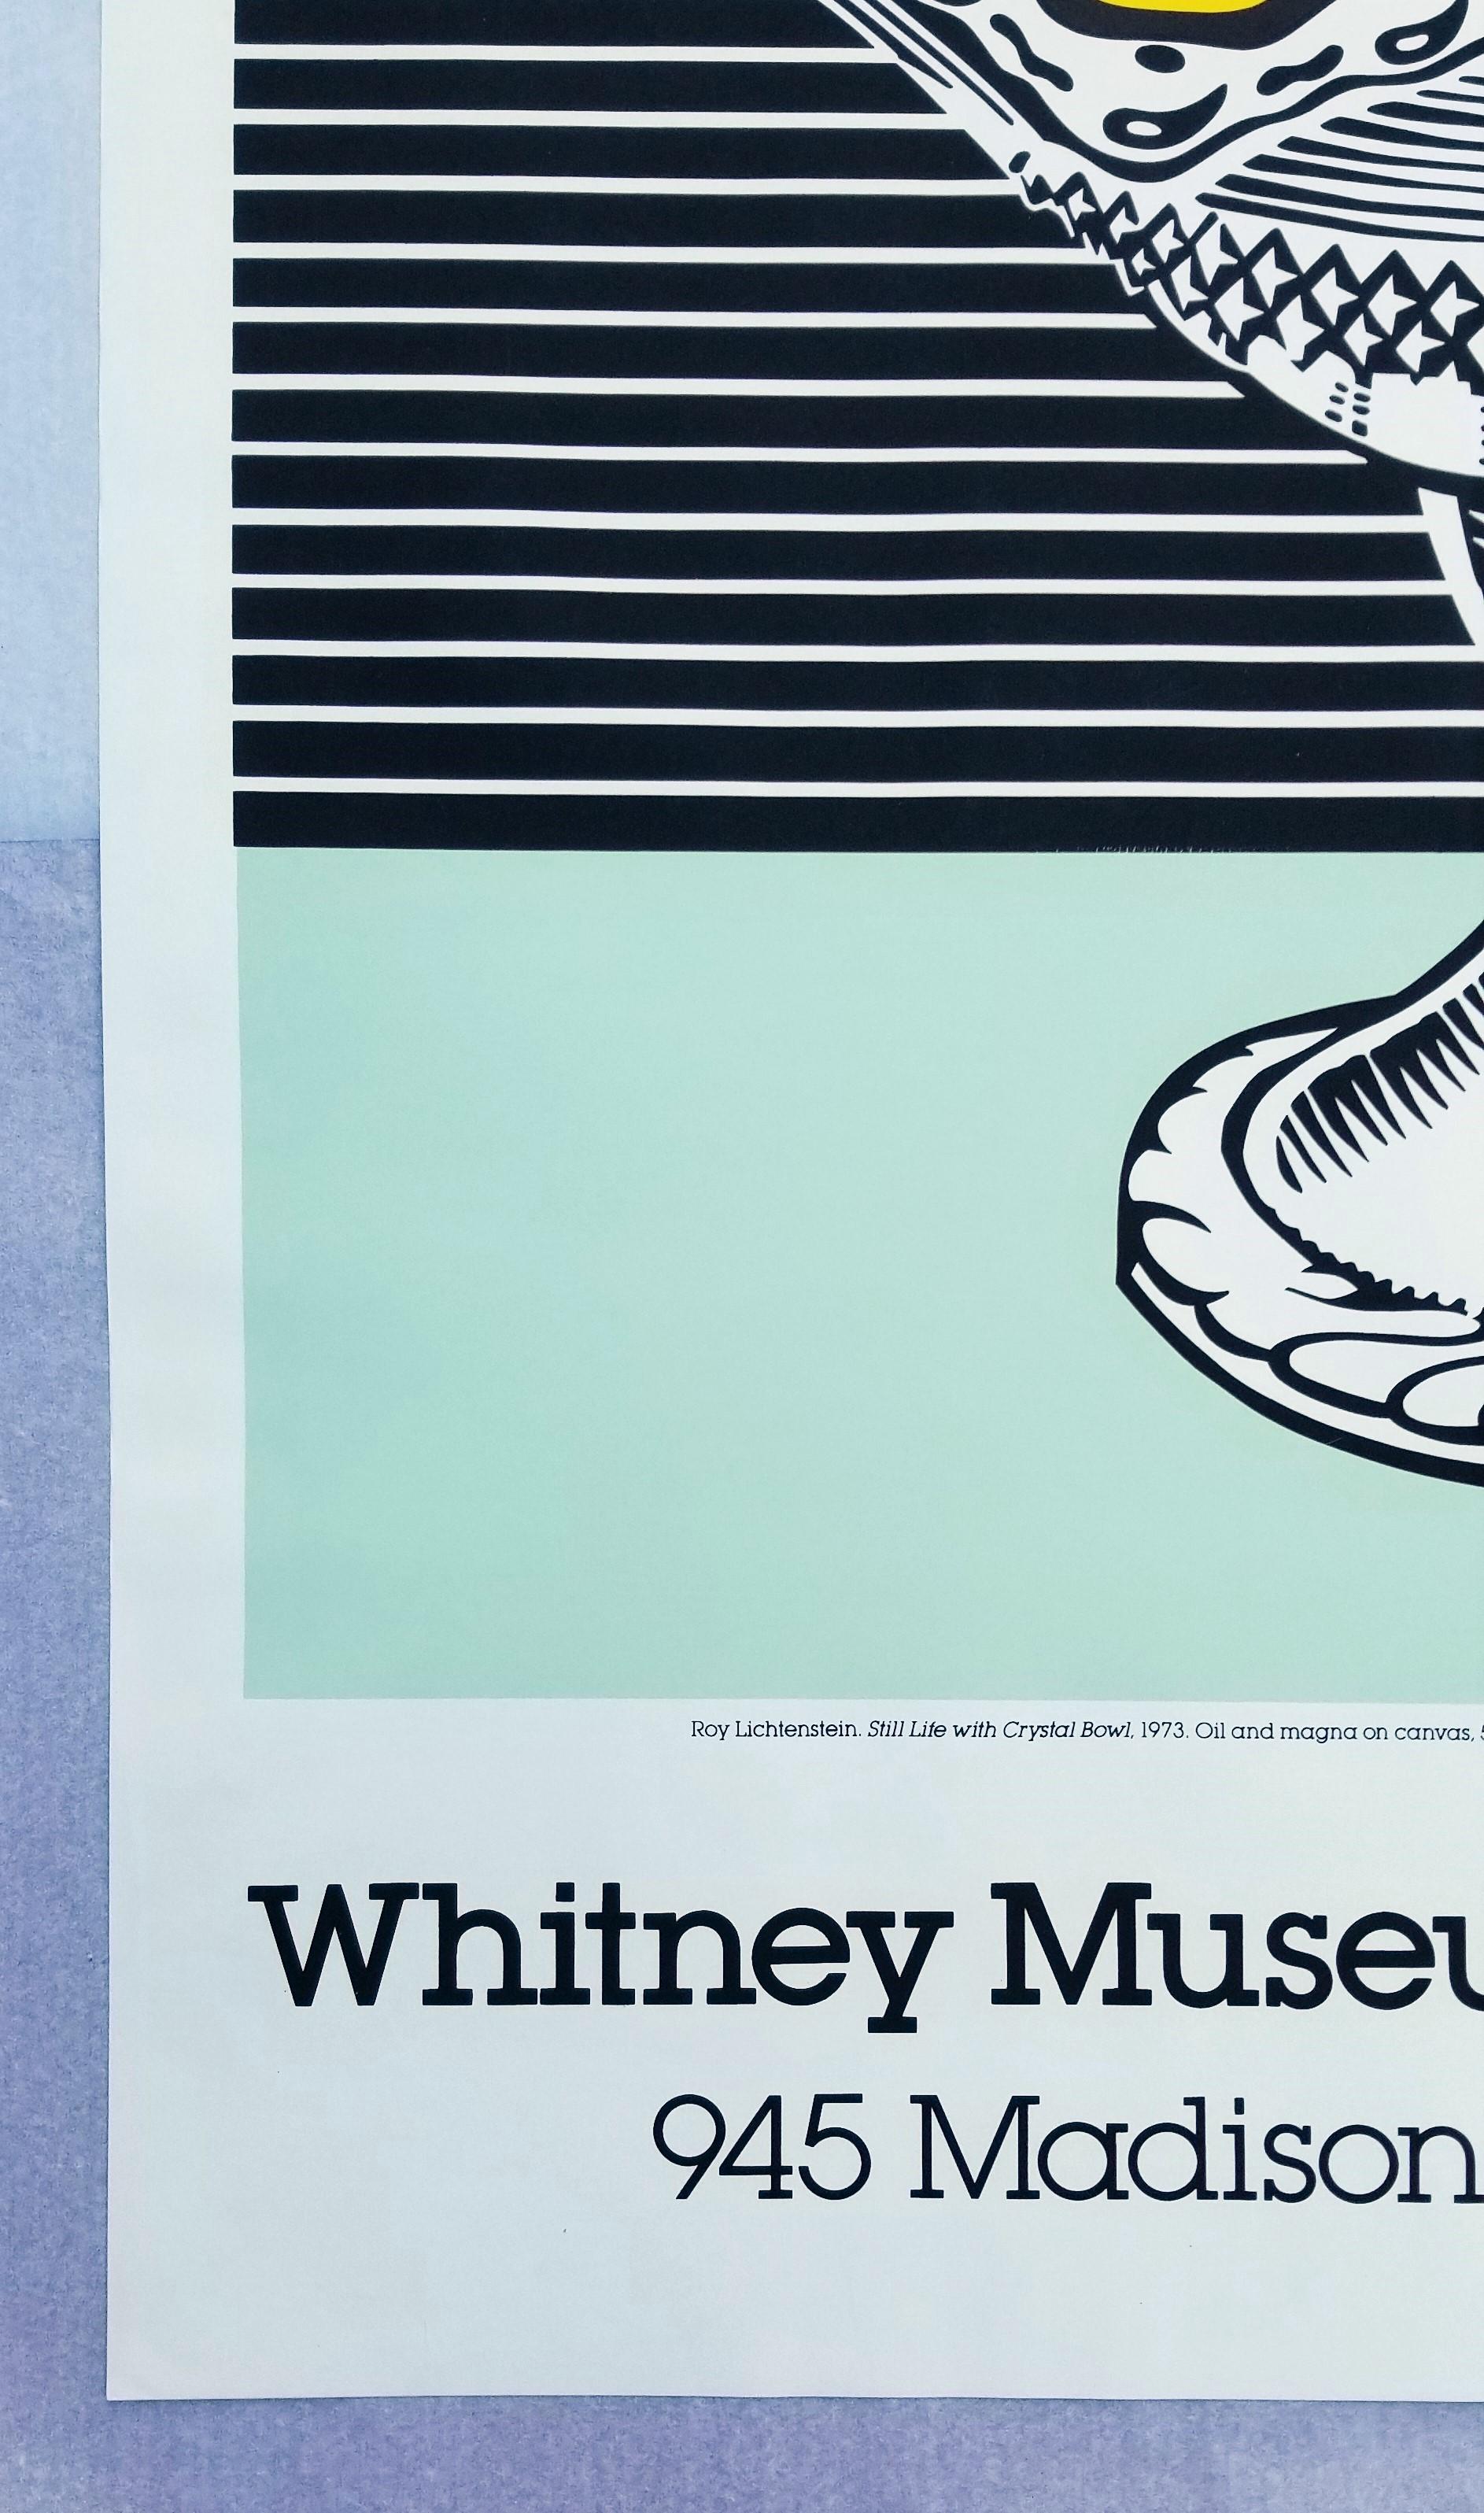 Whitney Museum of American Art (Still Life with Crystal Bowl) Poster /// Pop Art 1